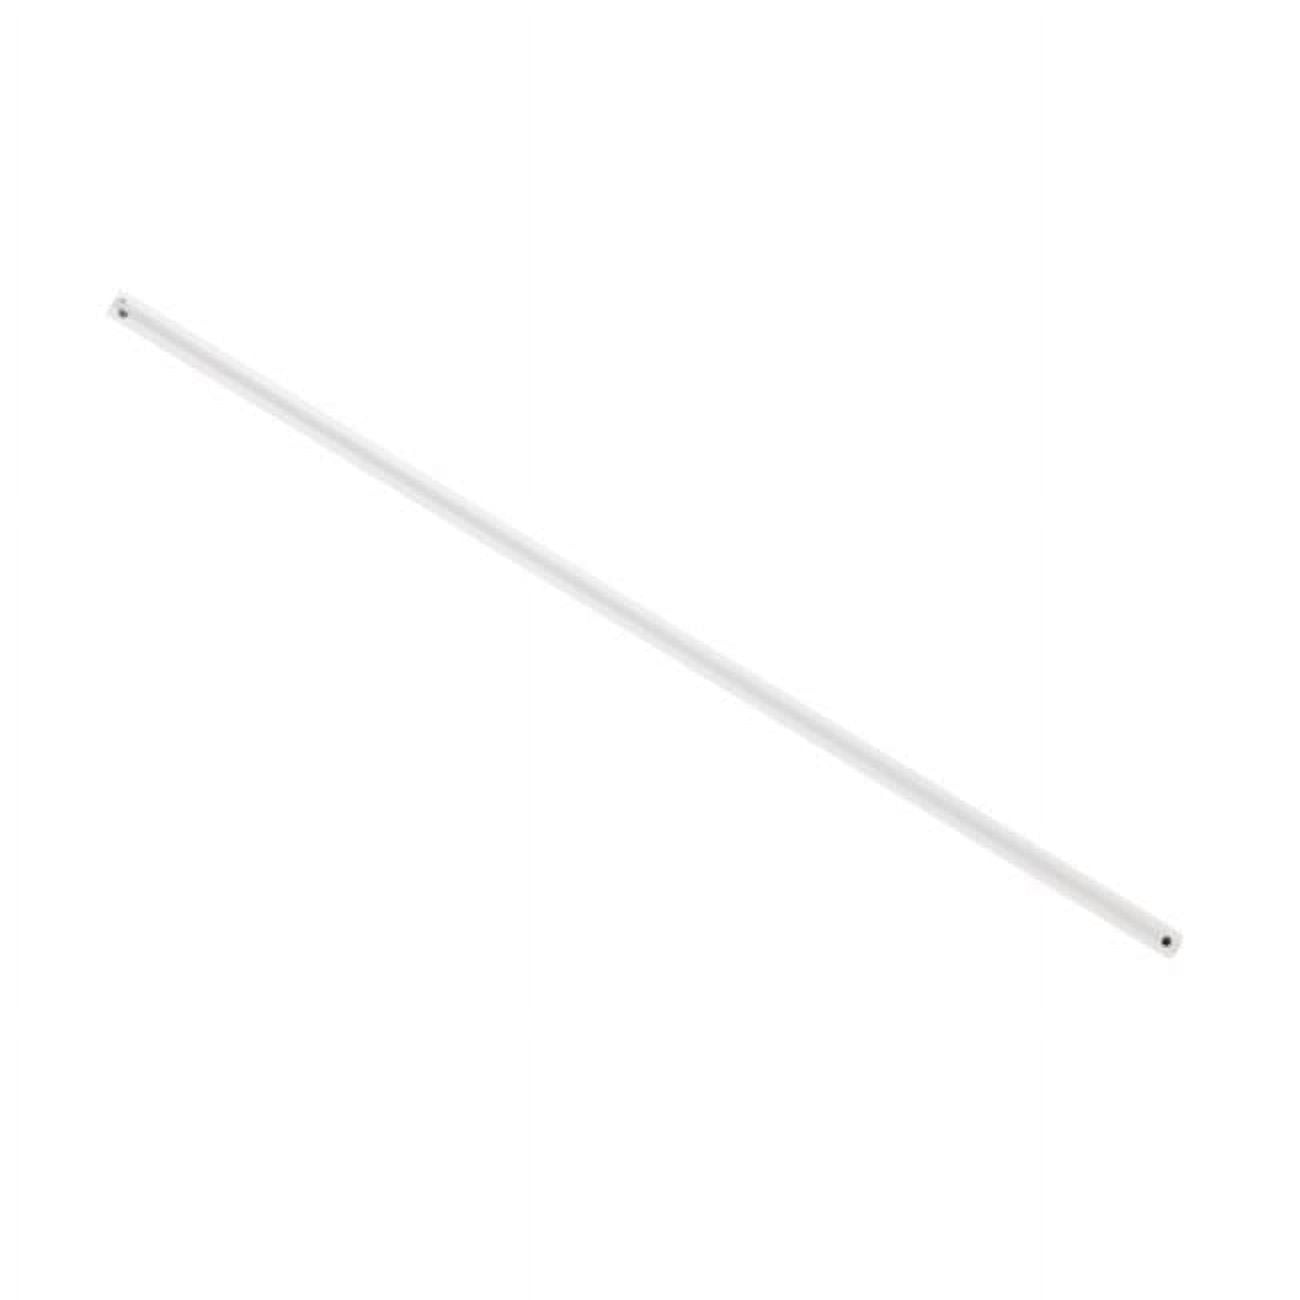 Picture of Lucci Air 21321824 Lucci Air Abyss White 24-inch Downrod